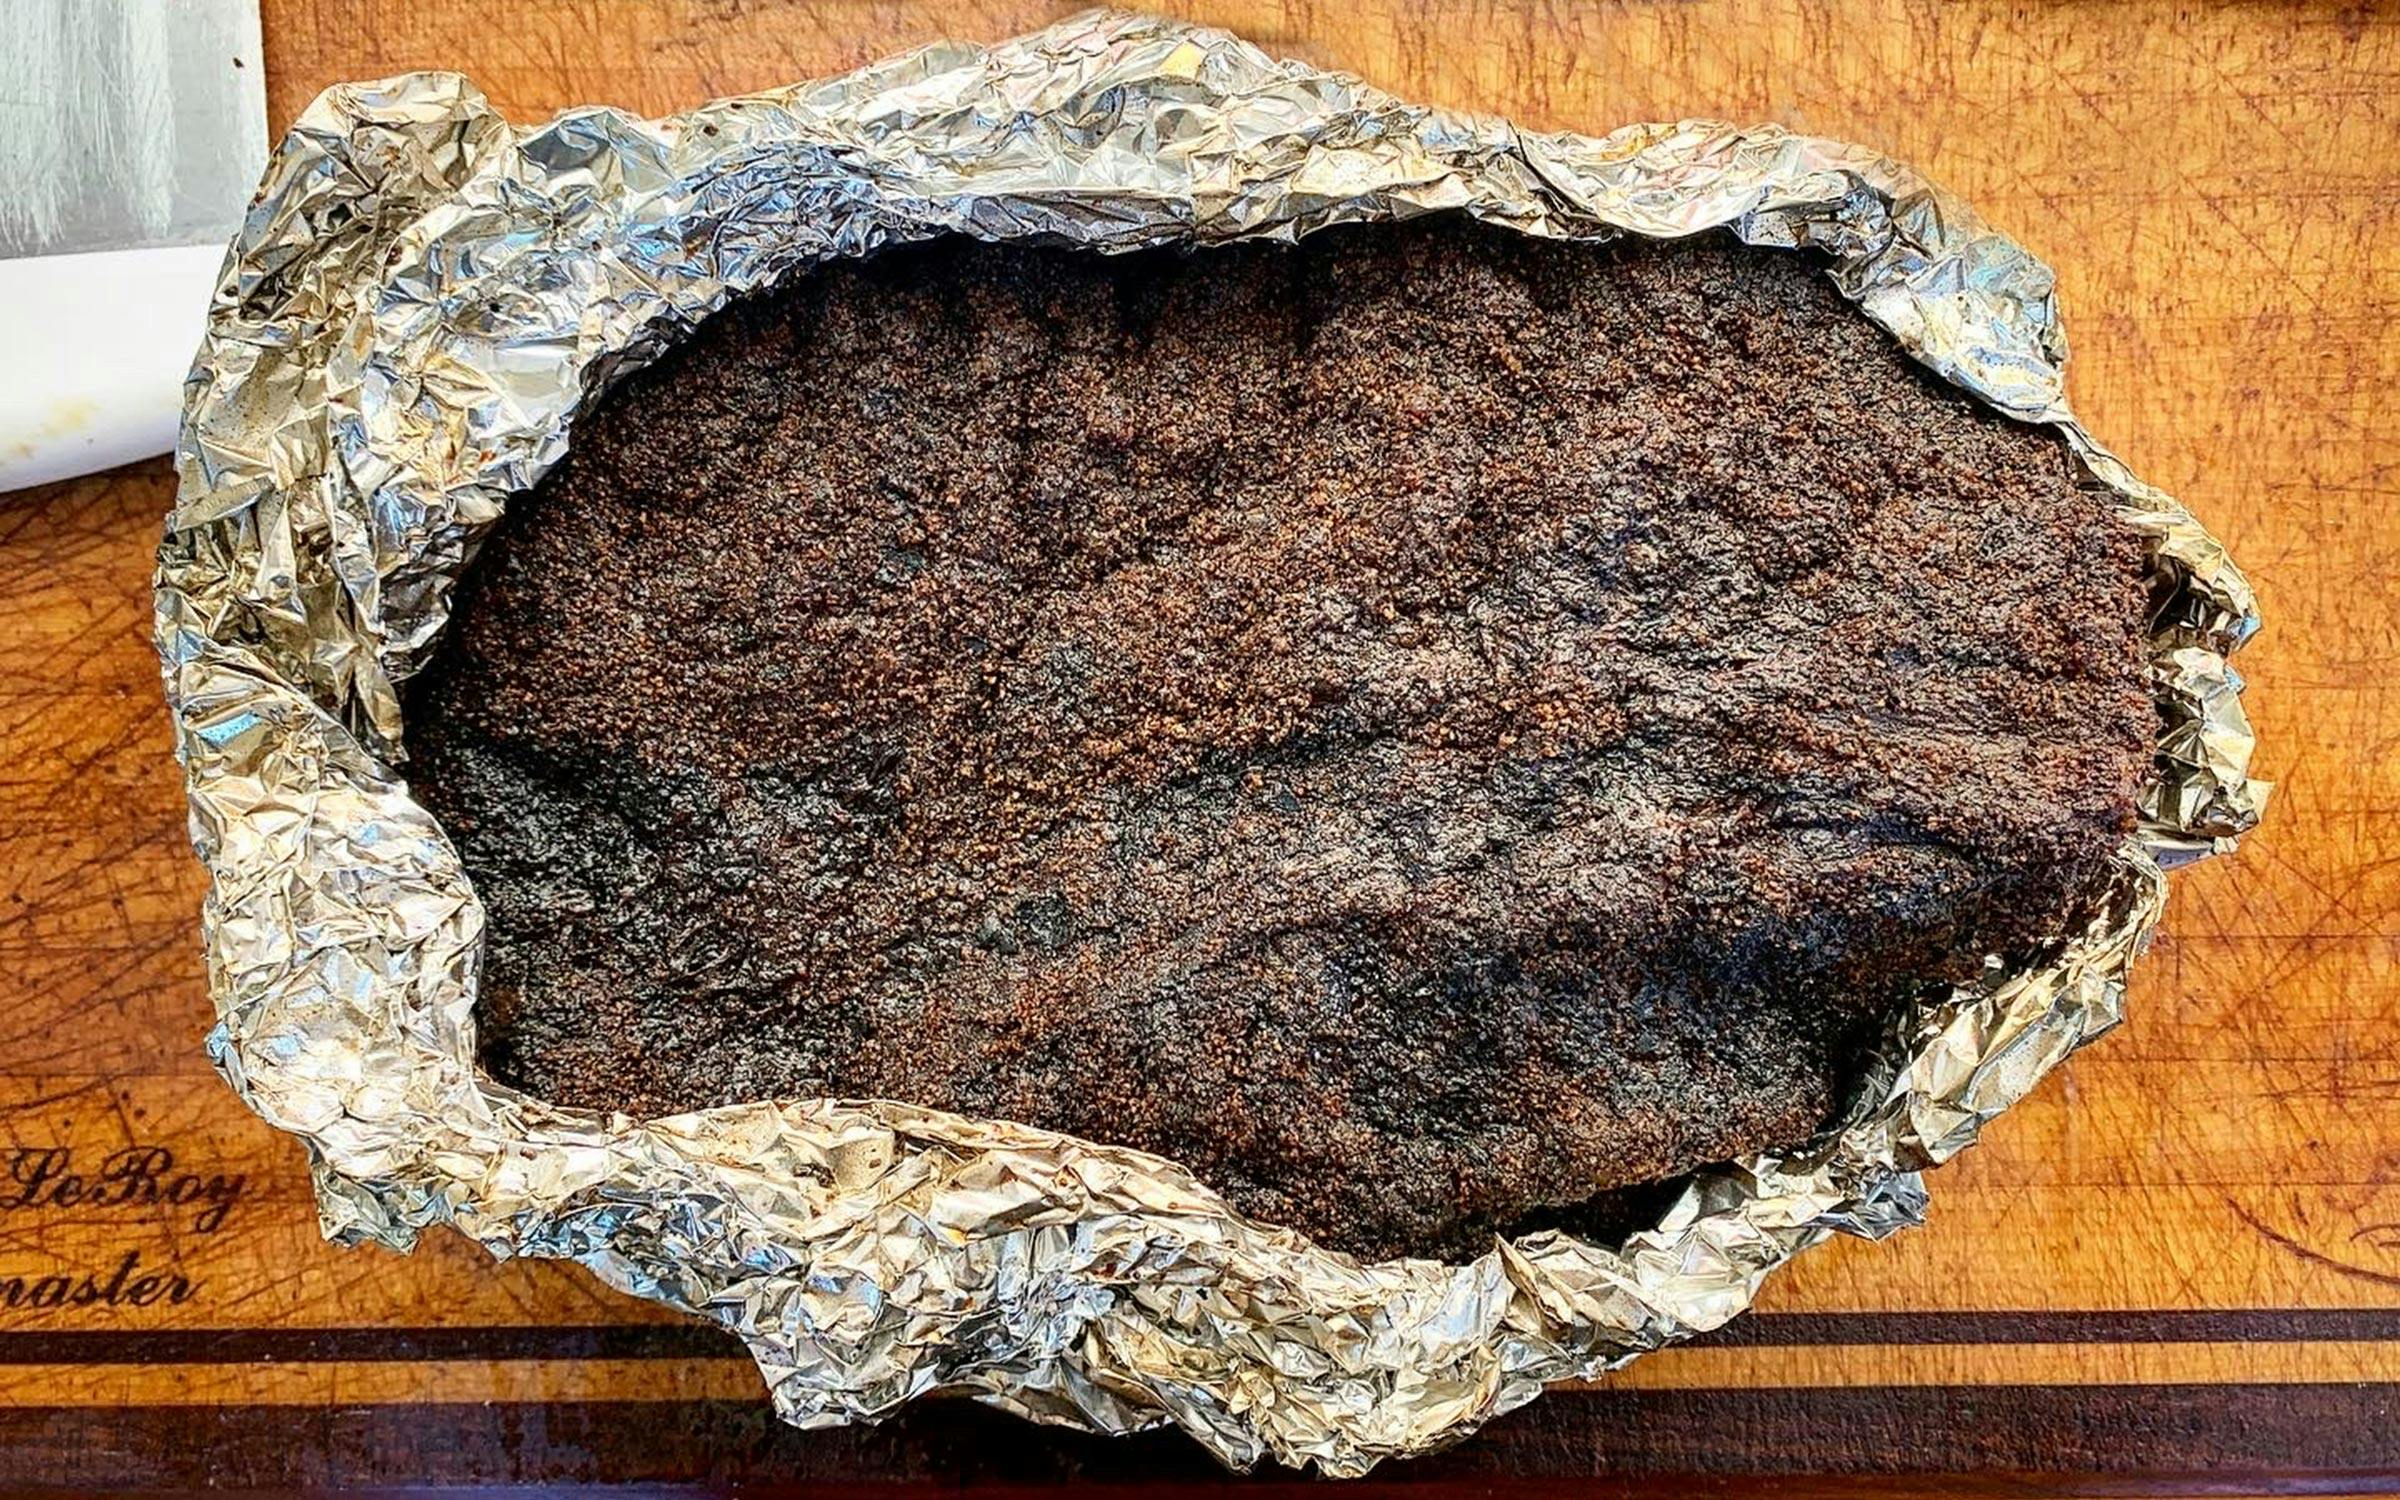 Is the Foil-Boat Method the Best Way to Cook Brisket? – Texas Monthly